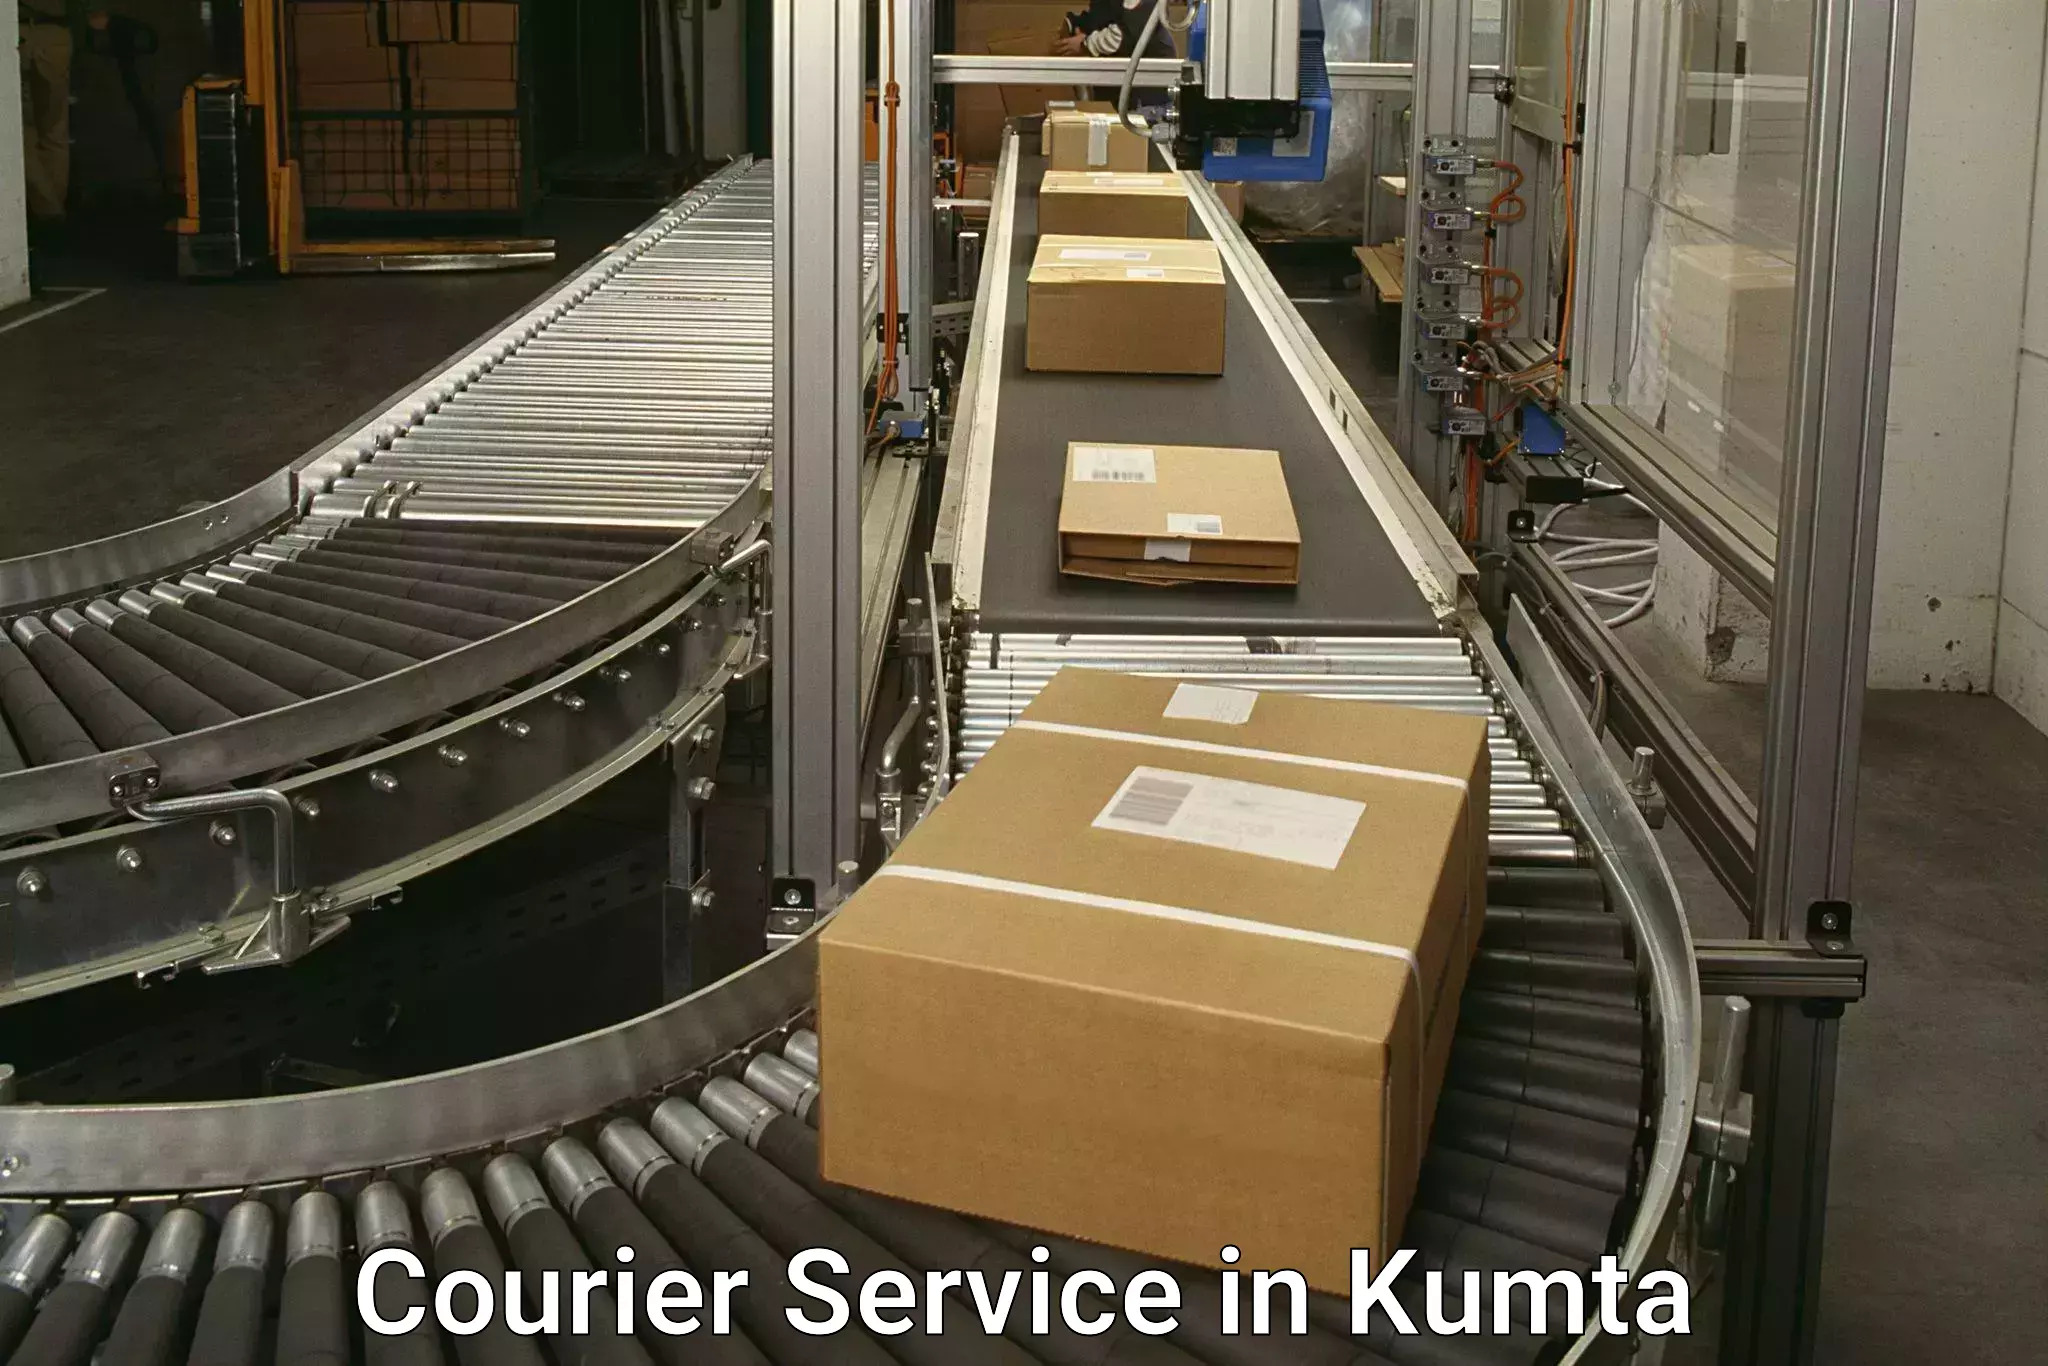 Nationwide courier service in Kumta